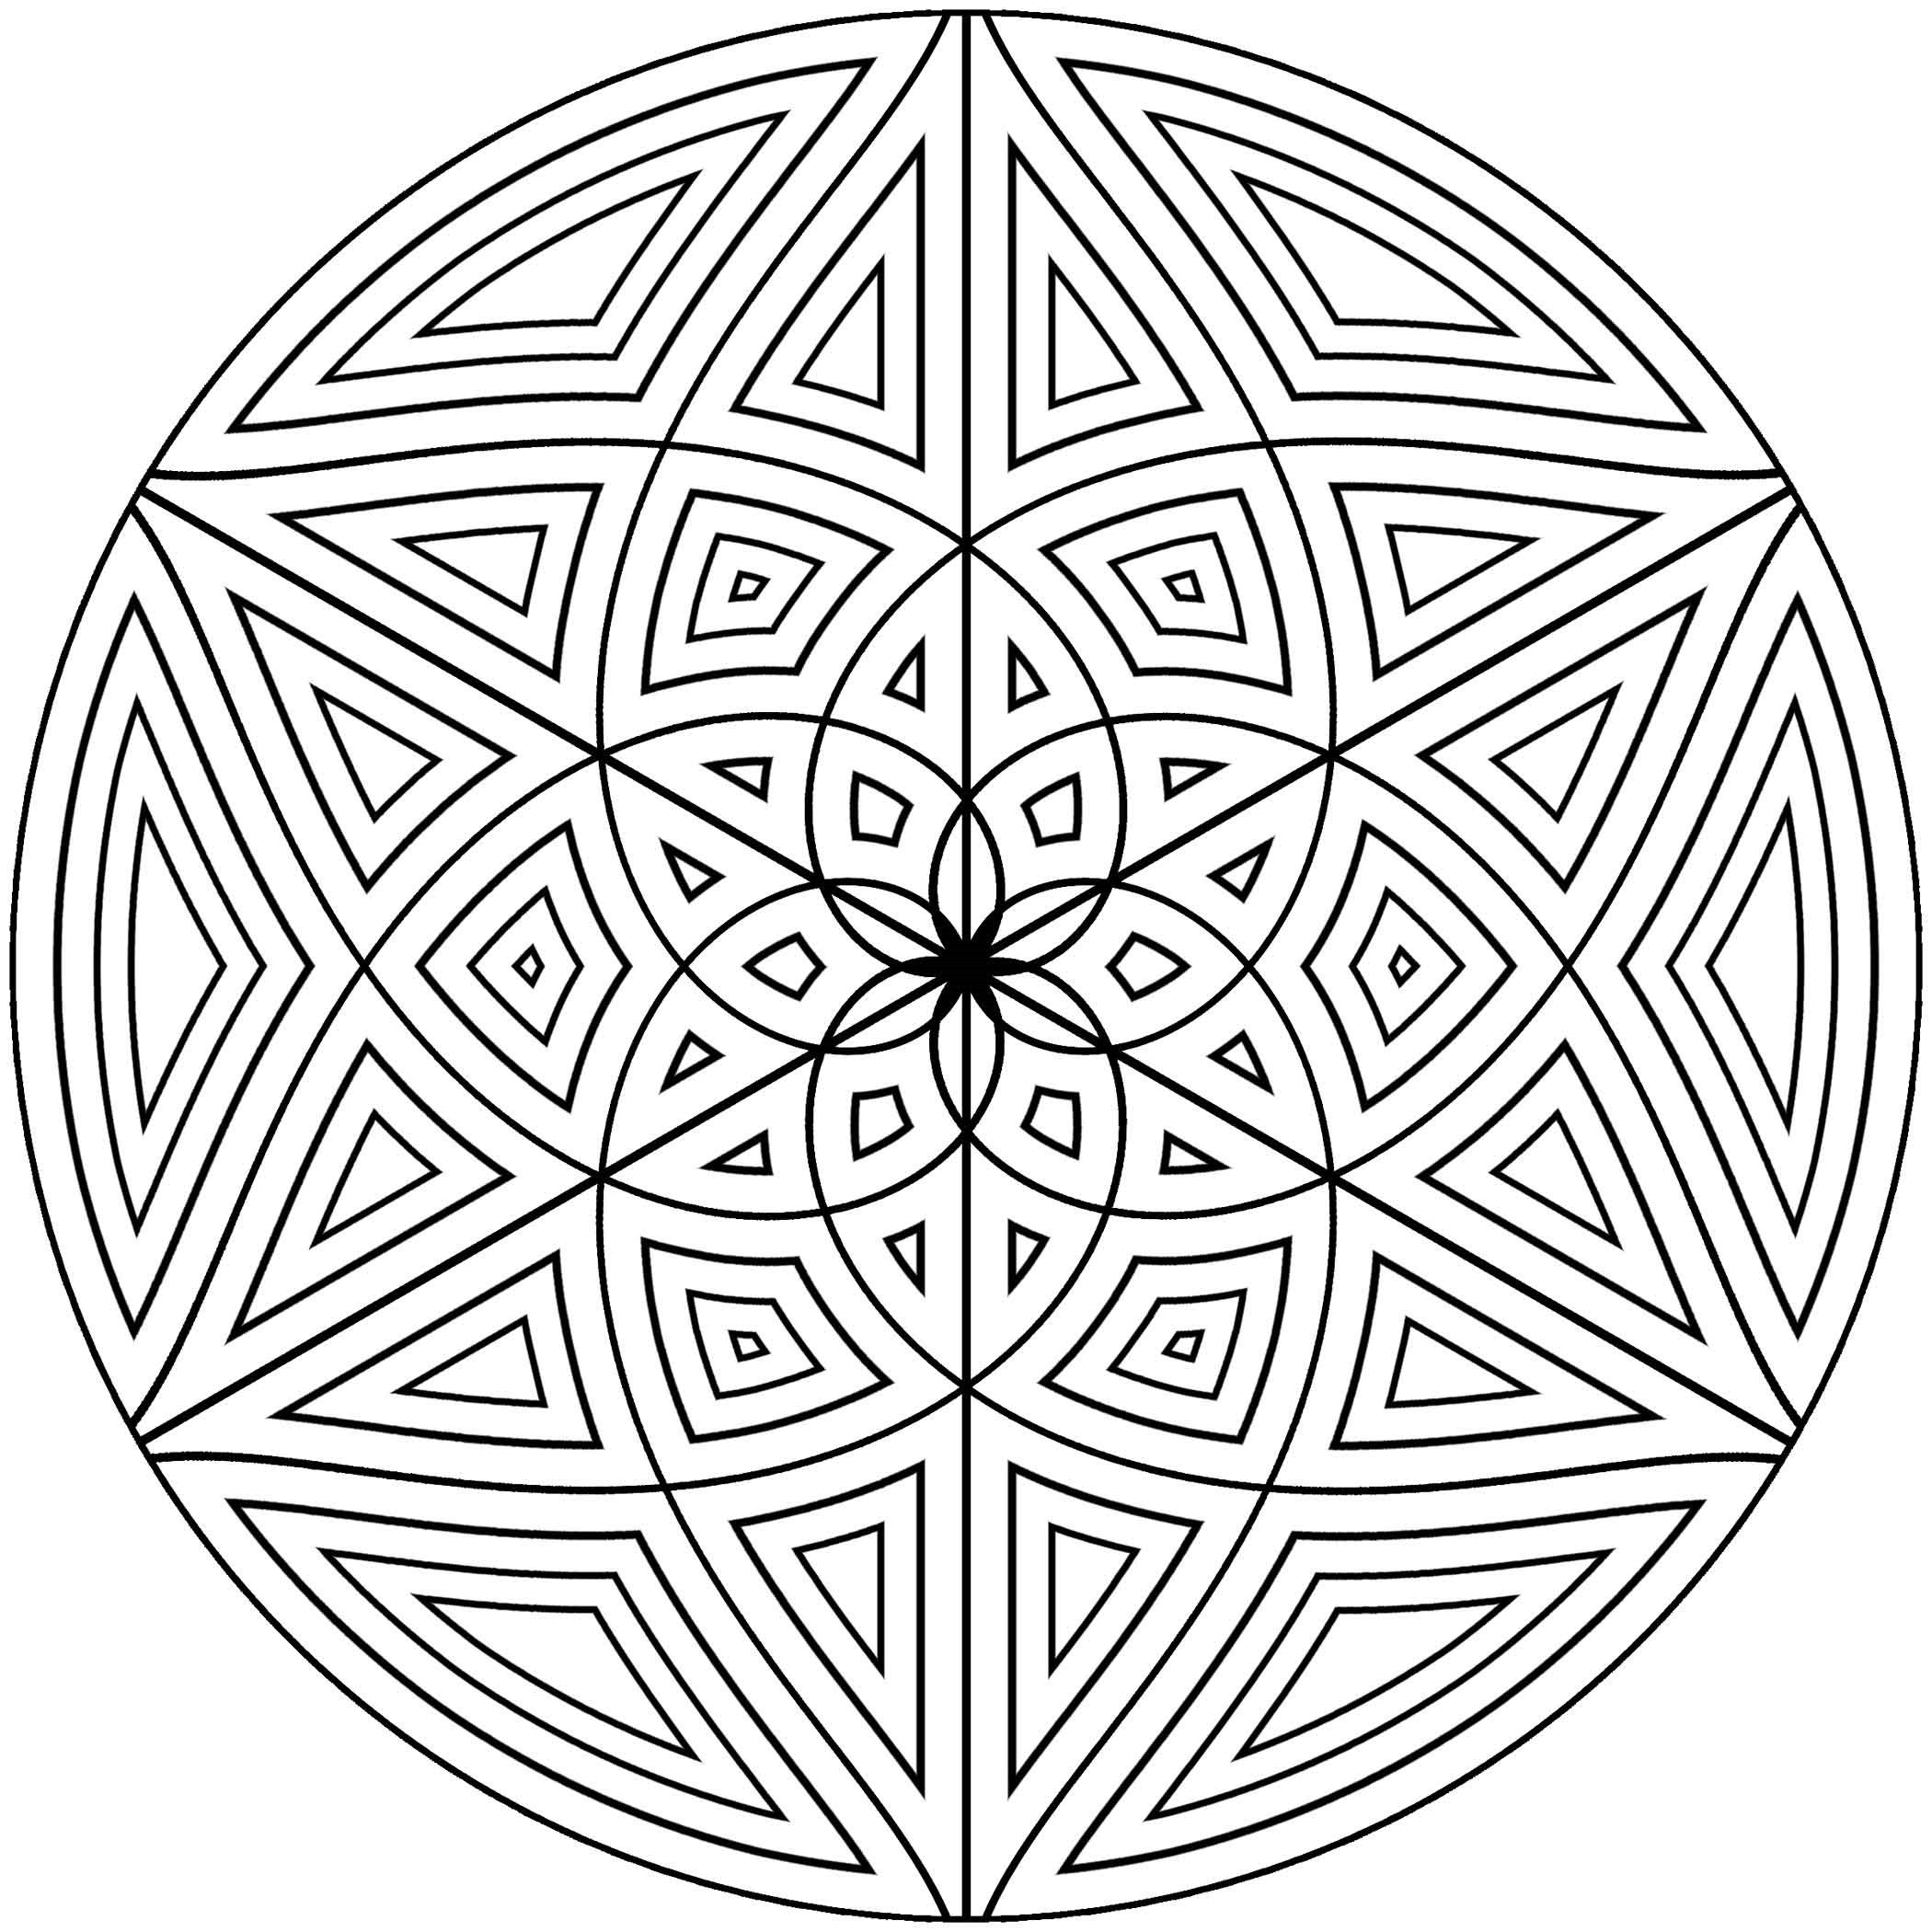 Free Geometric Coloring Pages For Adults
 Free Printable Geometric Coloring Pages for Adults